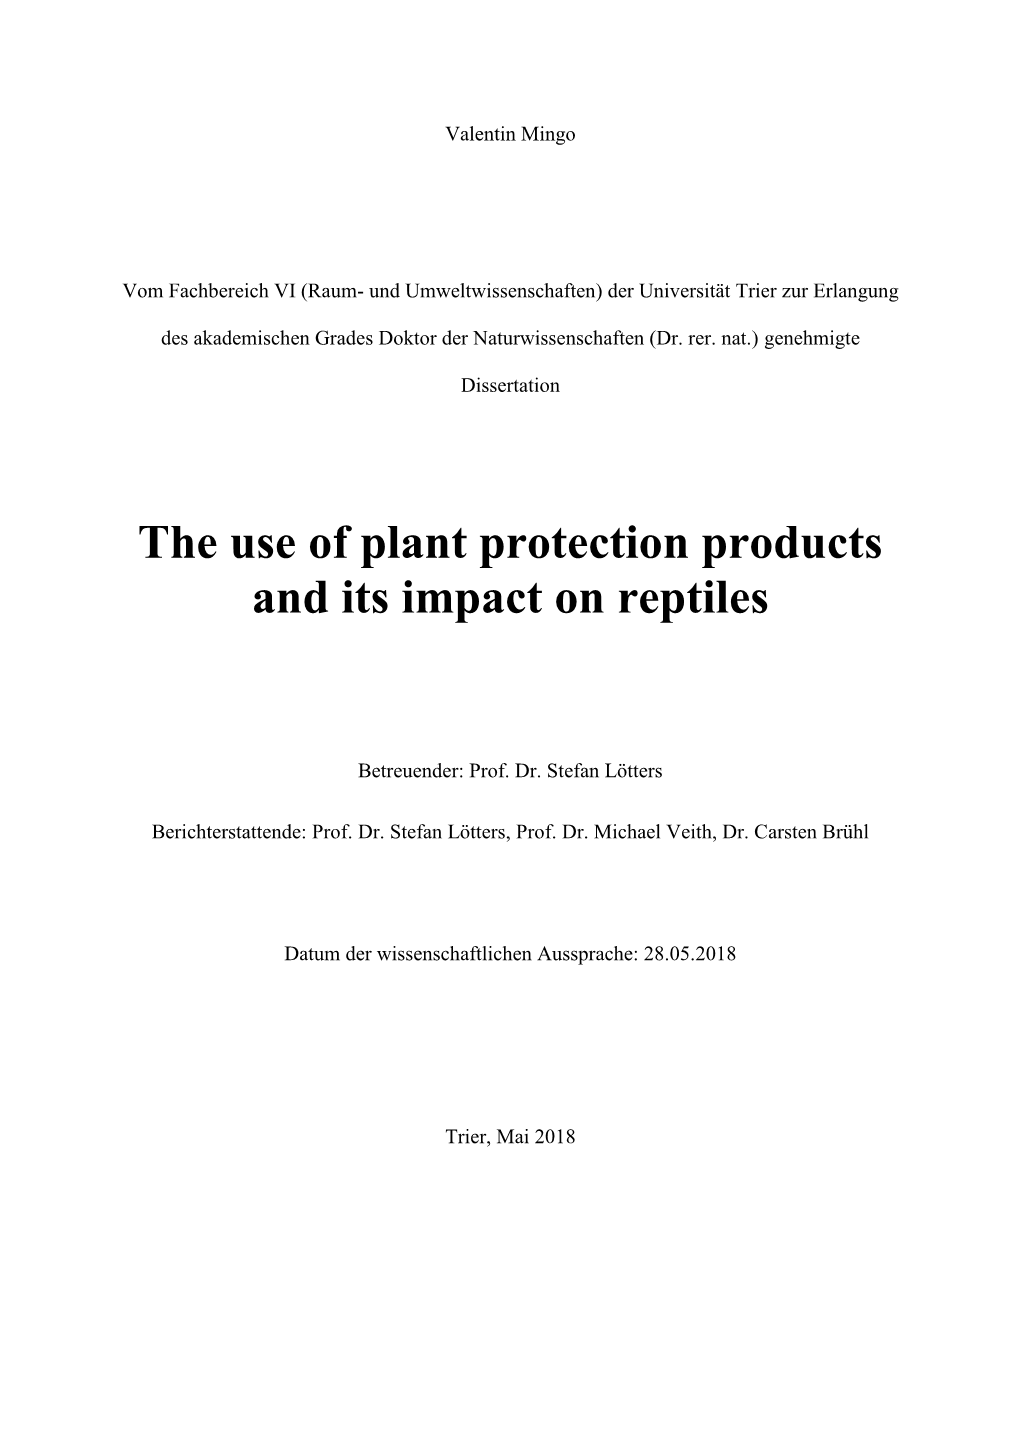 Dissertation the Use of Plant Protection Products and Its Impact